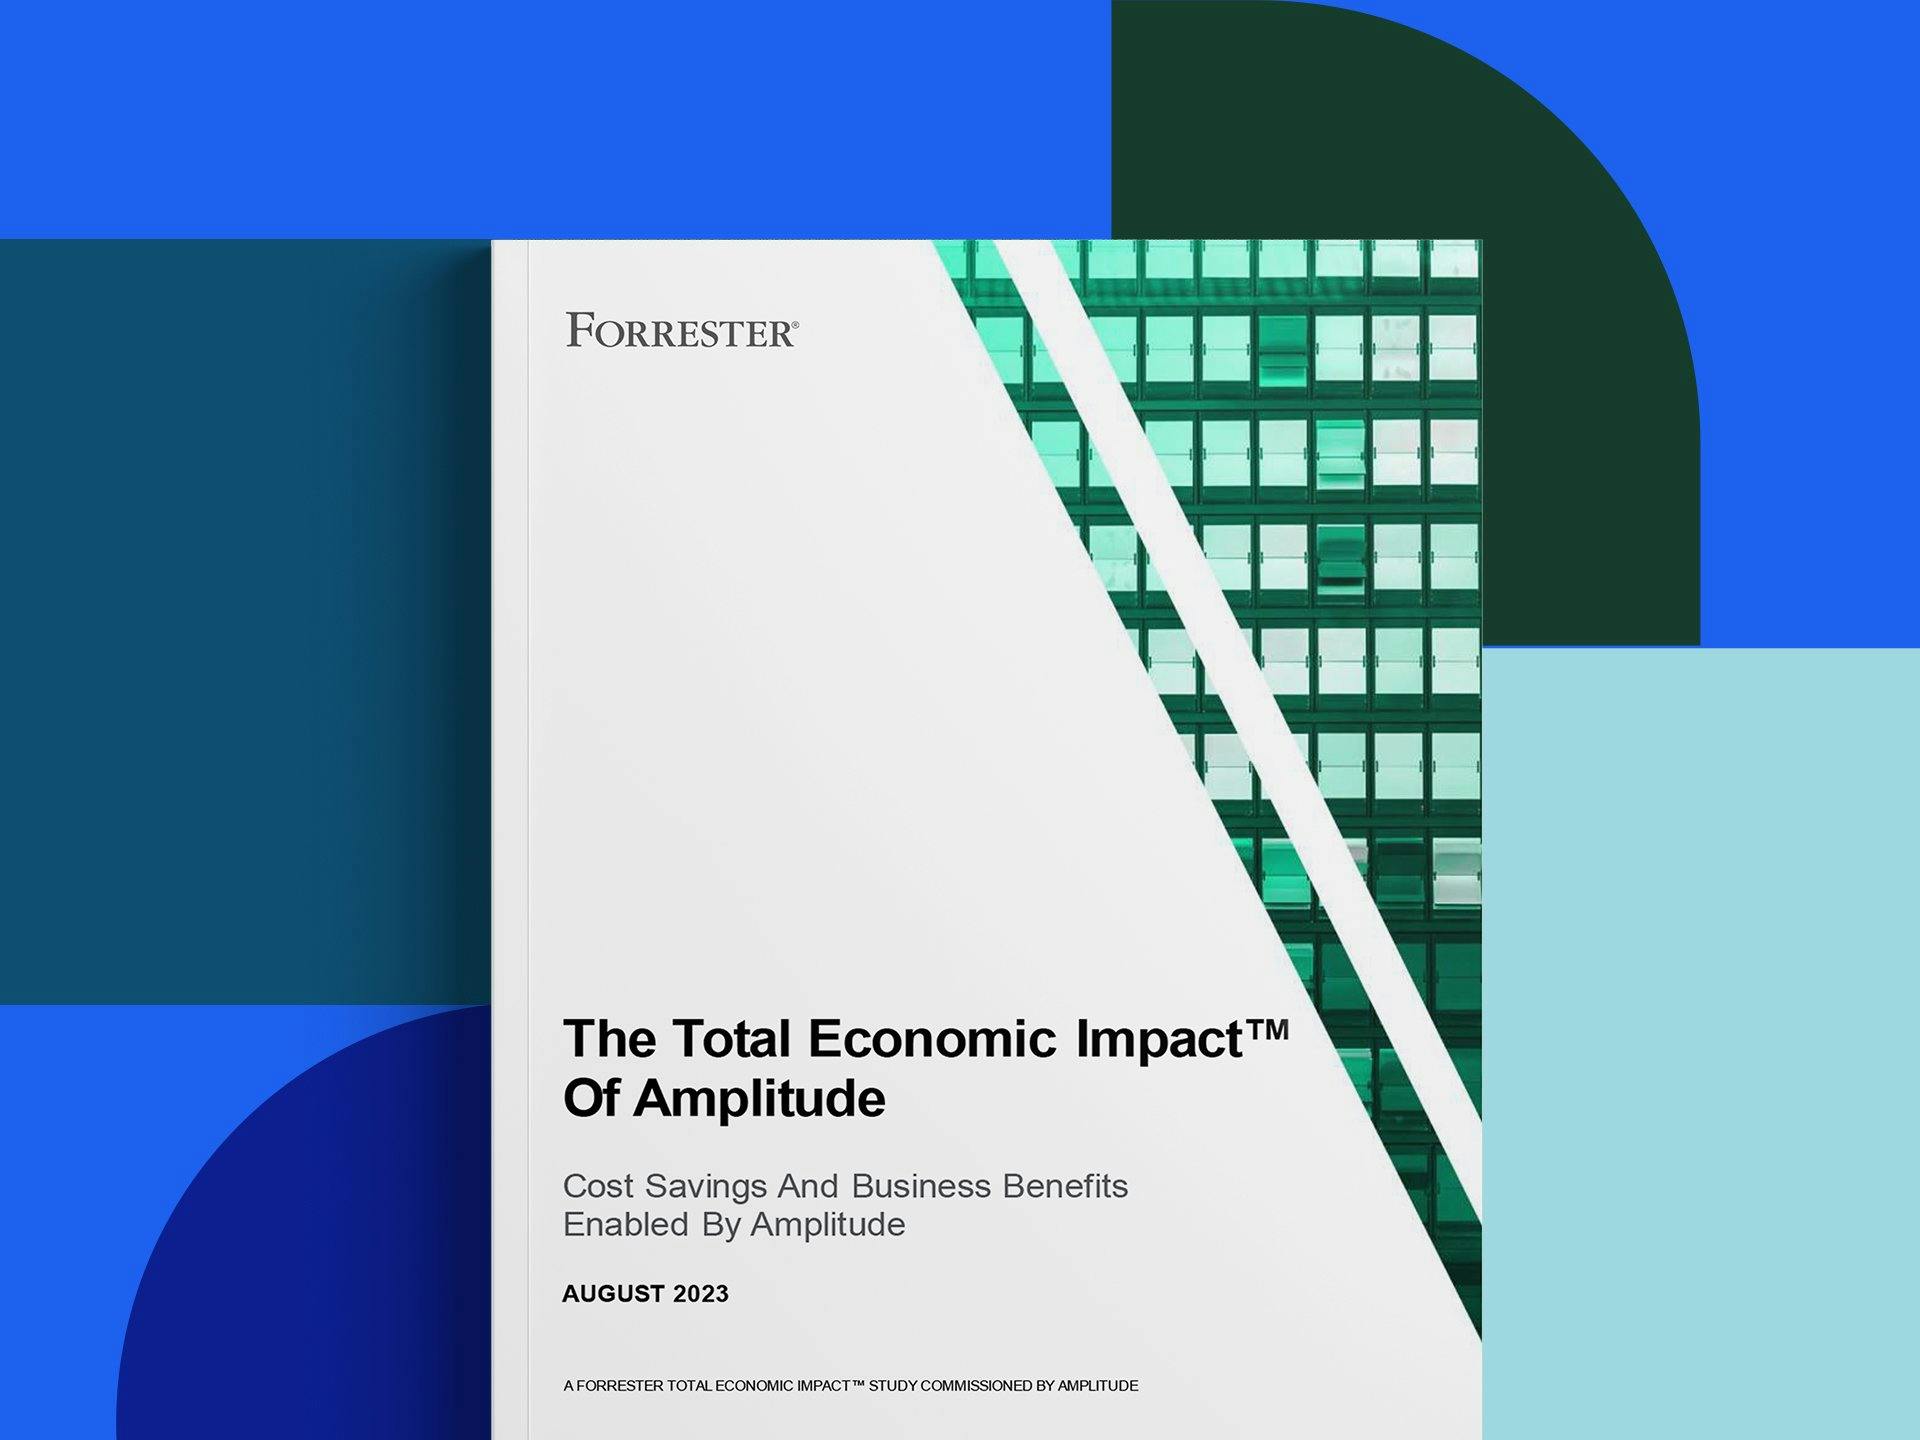 Total Economic Impact™ (TEI) of Amplitude, a commissioned study conducted by Forrester on behalf of Amplitude. 